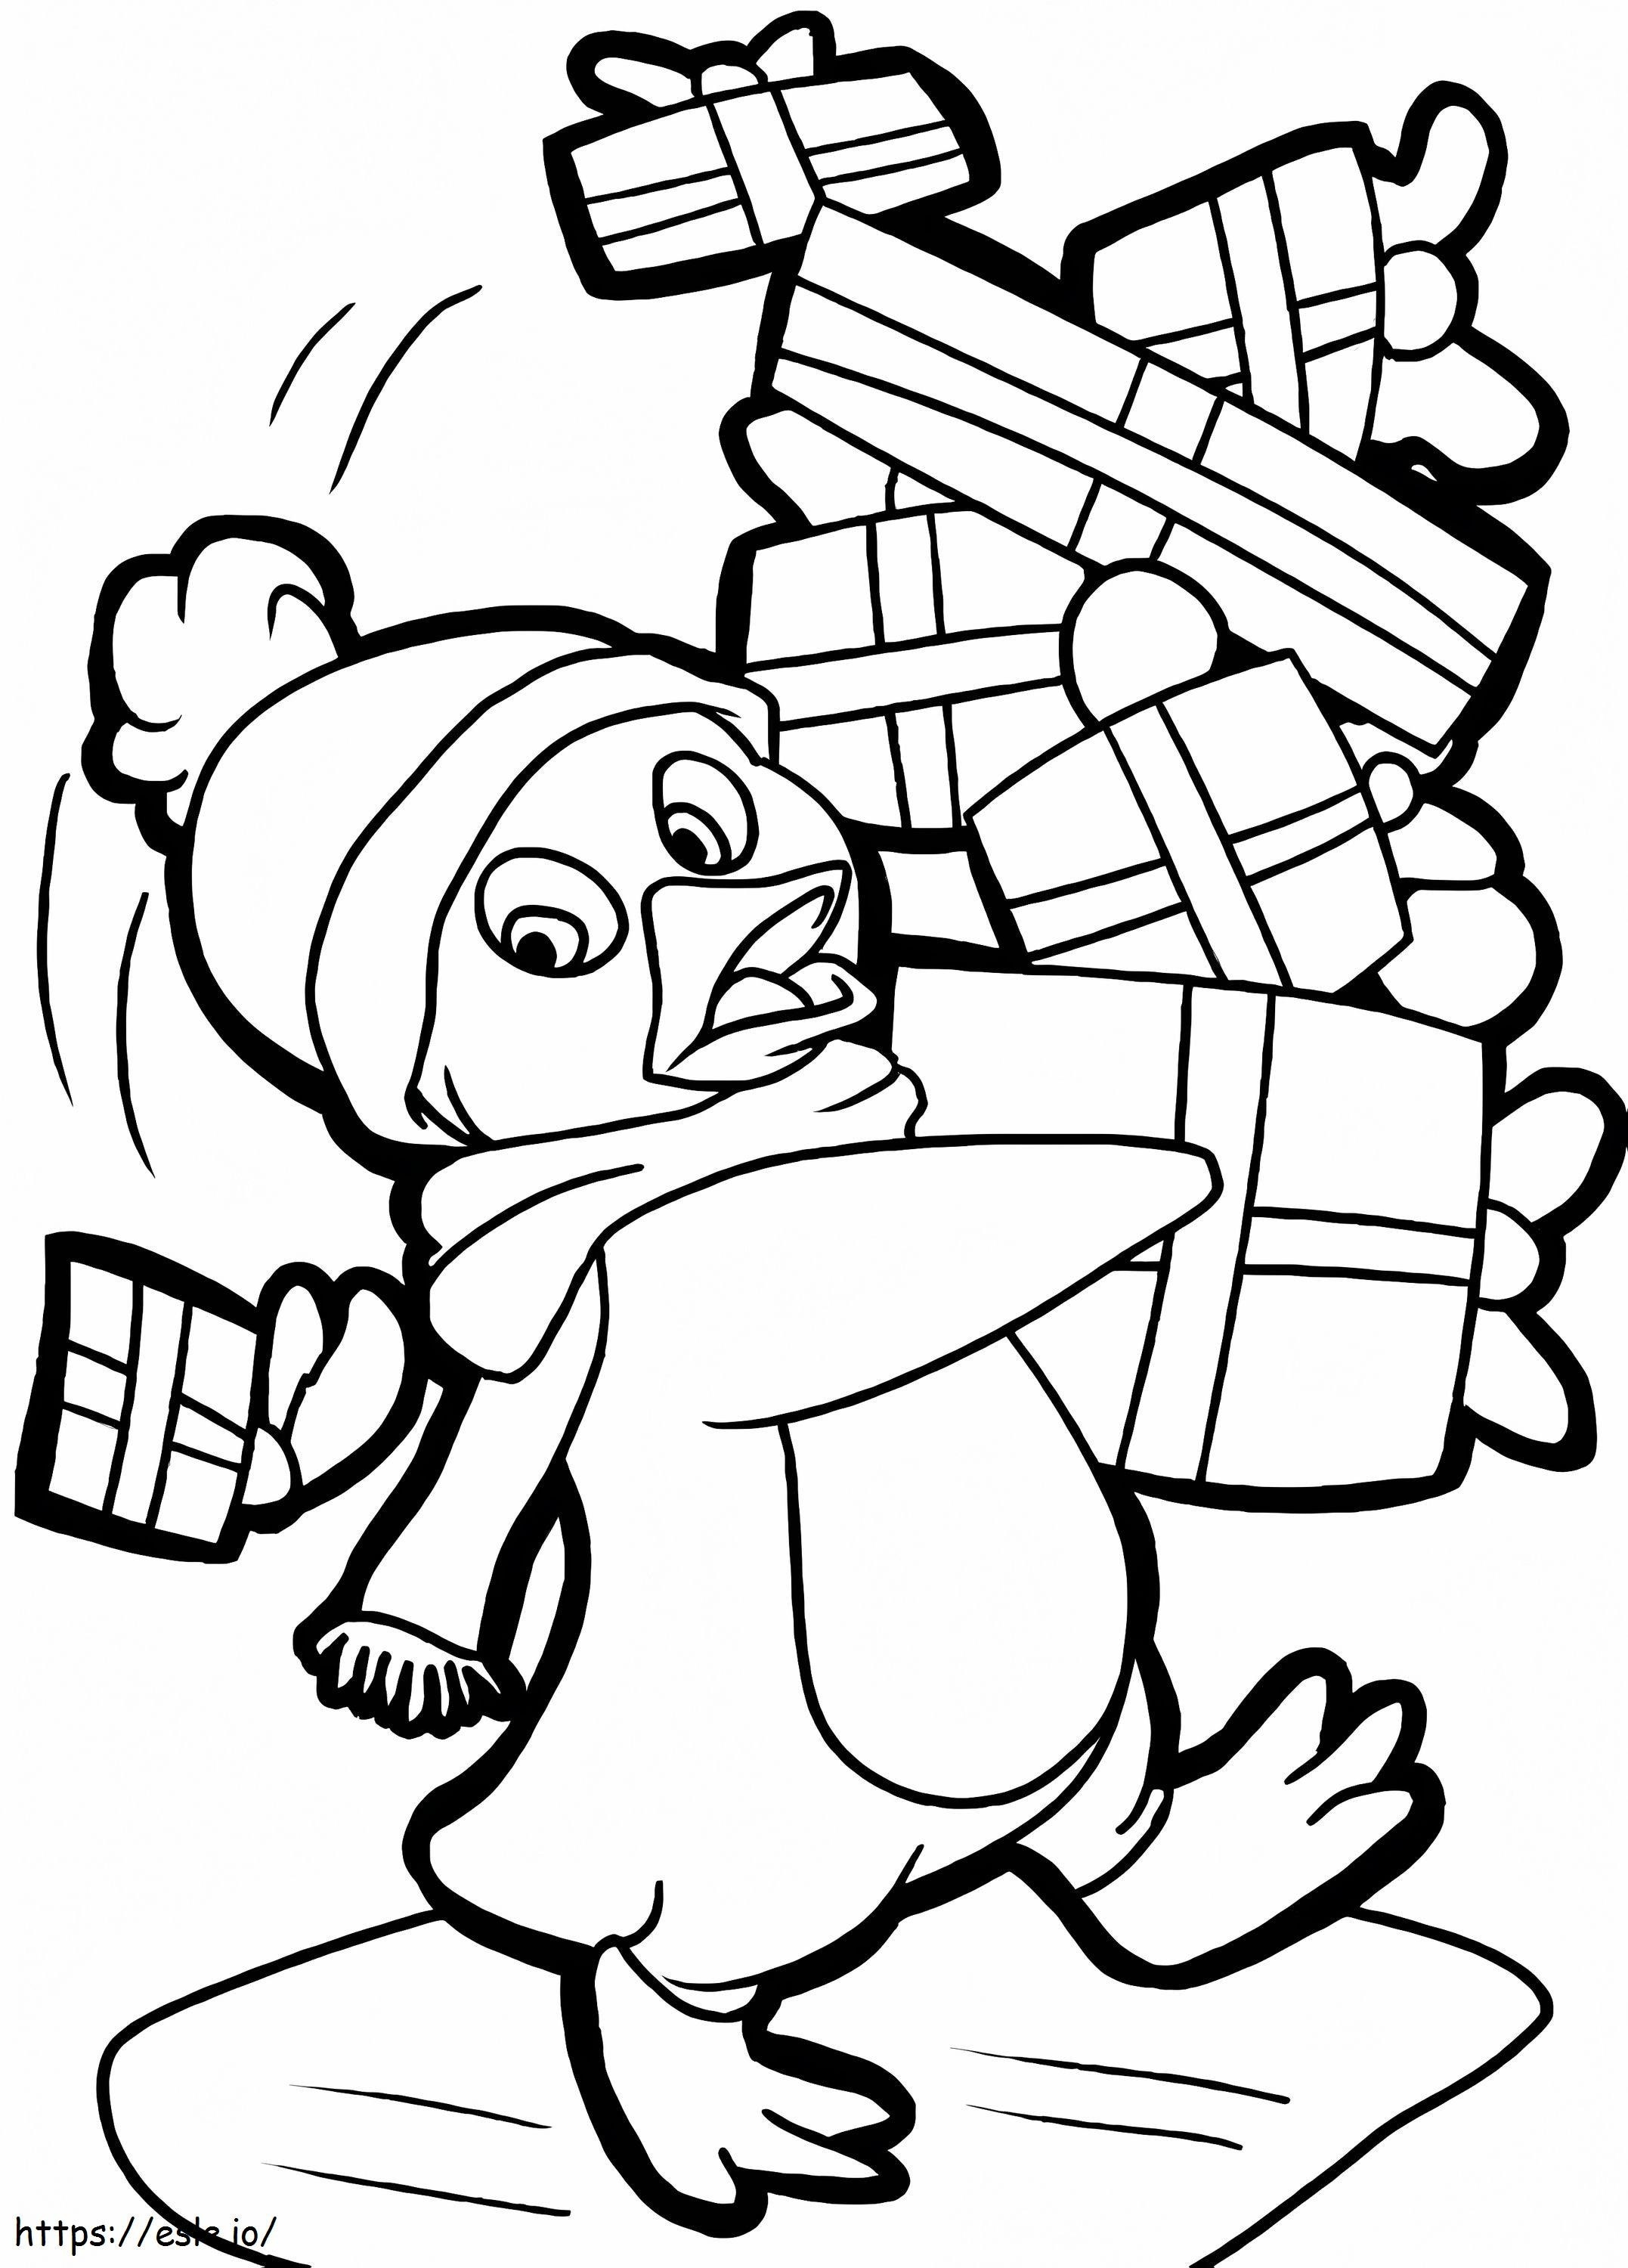 Penguin Holding Christmas Gifts 1 coloring page